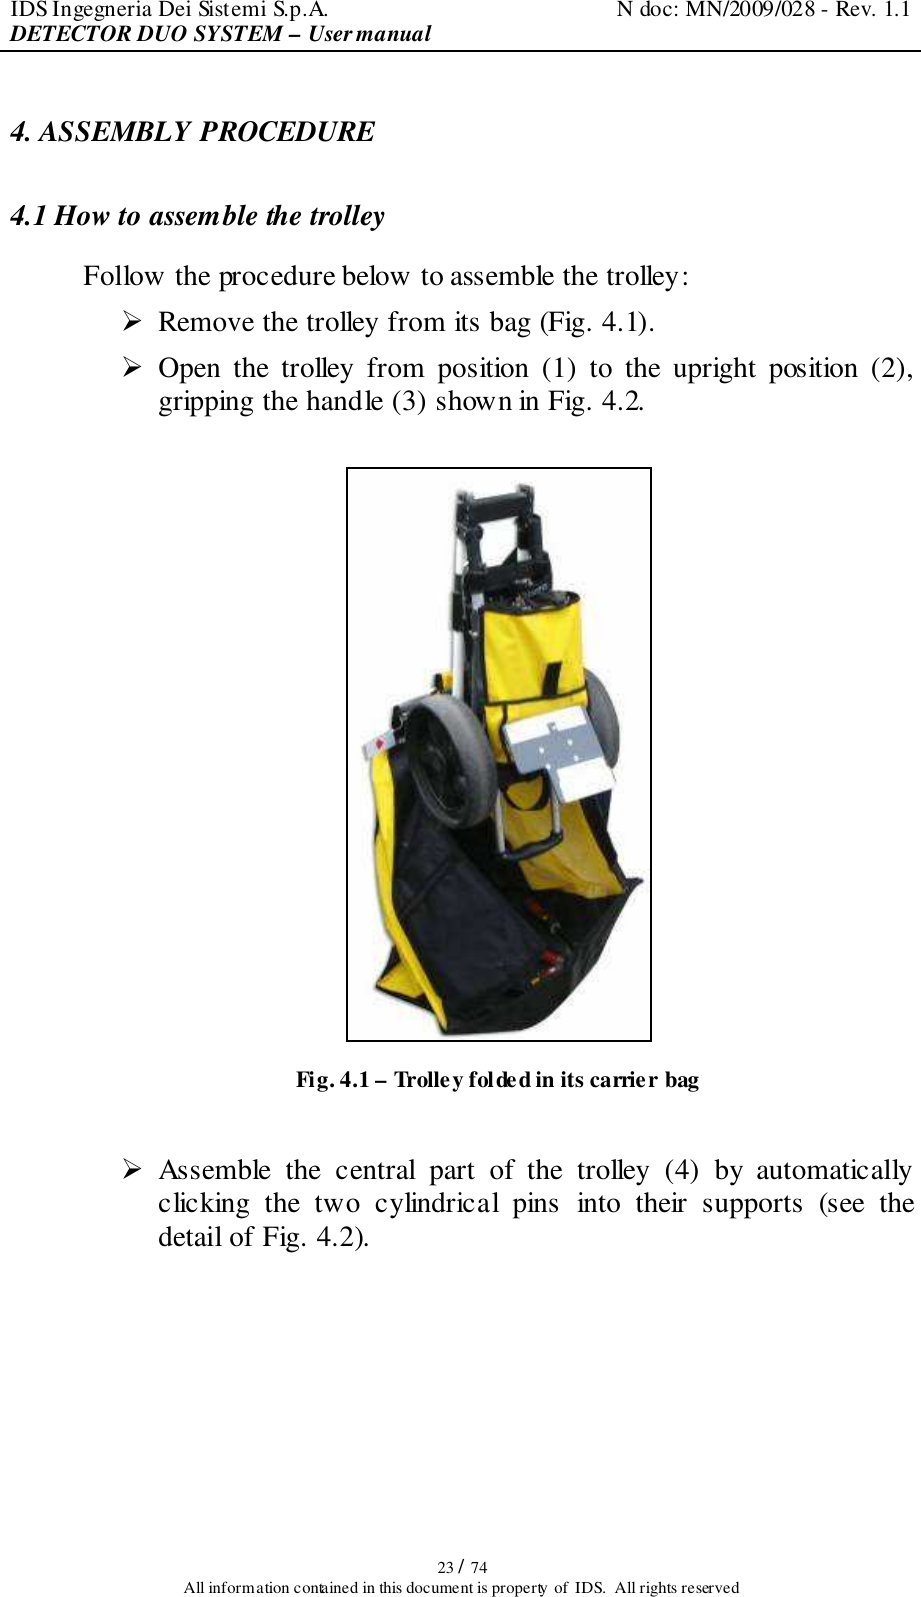 IDS Ingegneria Dei Sistemi S.p.A.  N doc: MN/2009/028 - Rev. 1.1 DETECTOR DUO SYSTEM – User manual   23 / 74 All information contained in this document is property of  IDS.  All rights reserved 4. ASSEMBLY PROCEDURE 4.1 How to assemble the trolley Follow the procedure below to assemble the trolley:  Remove the trolley from its bag (Fig. 4.1).  Open  the  trolley  from  position  (1)  to  the  upright  position  (2), gripping the handle (3) shown in Fig. 4.2.   Fig. 4.1 – Trolley folded in its carrier bag   Assemble  the  central  part  of  the  trolley  (4)  by  automatically clicking  the  two  cylindrical  pins  into  their  supports  (see  the detail of Fig. 4.2).  